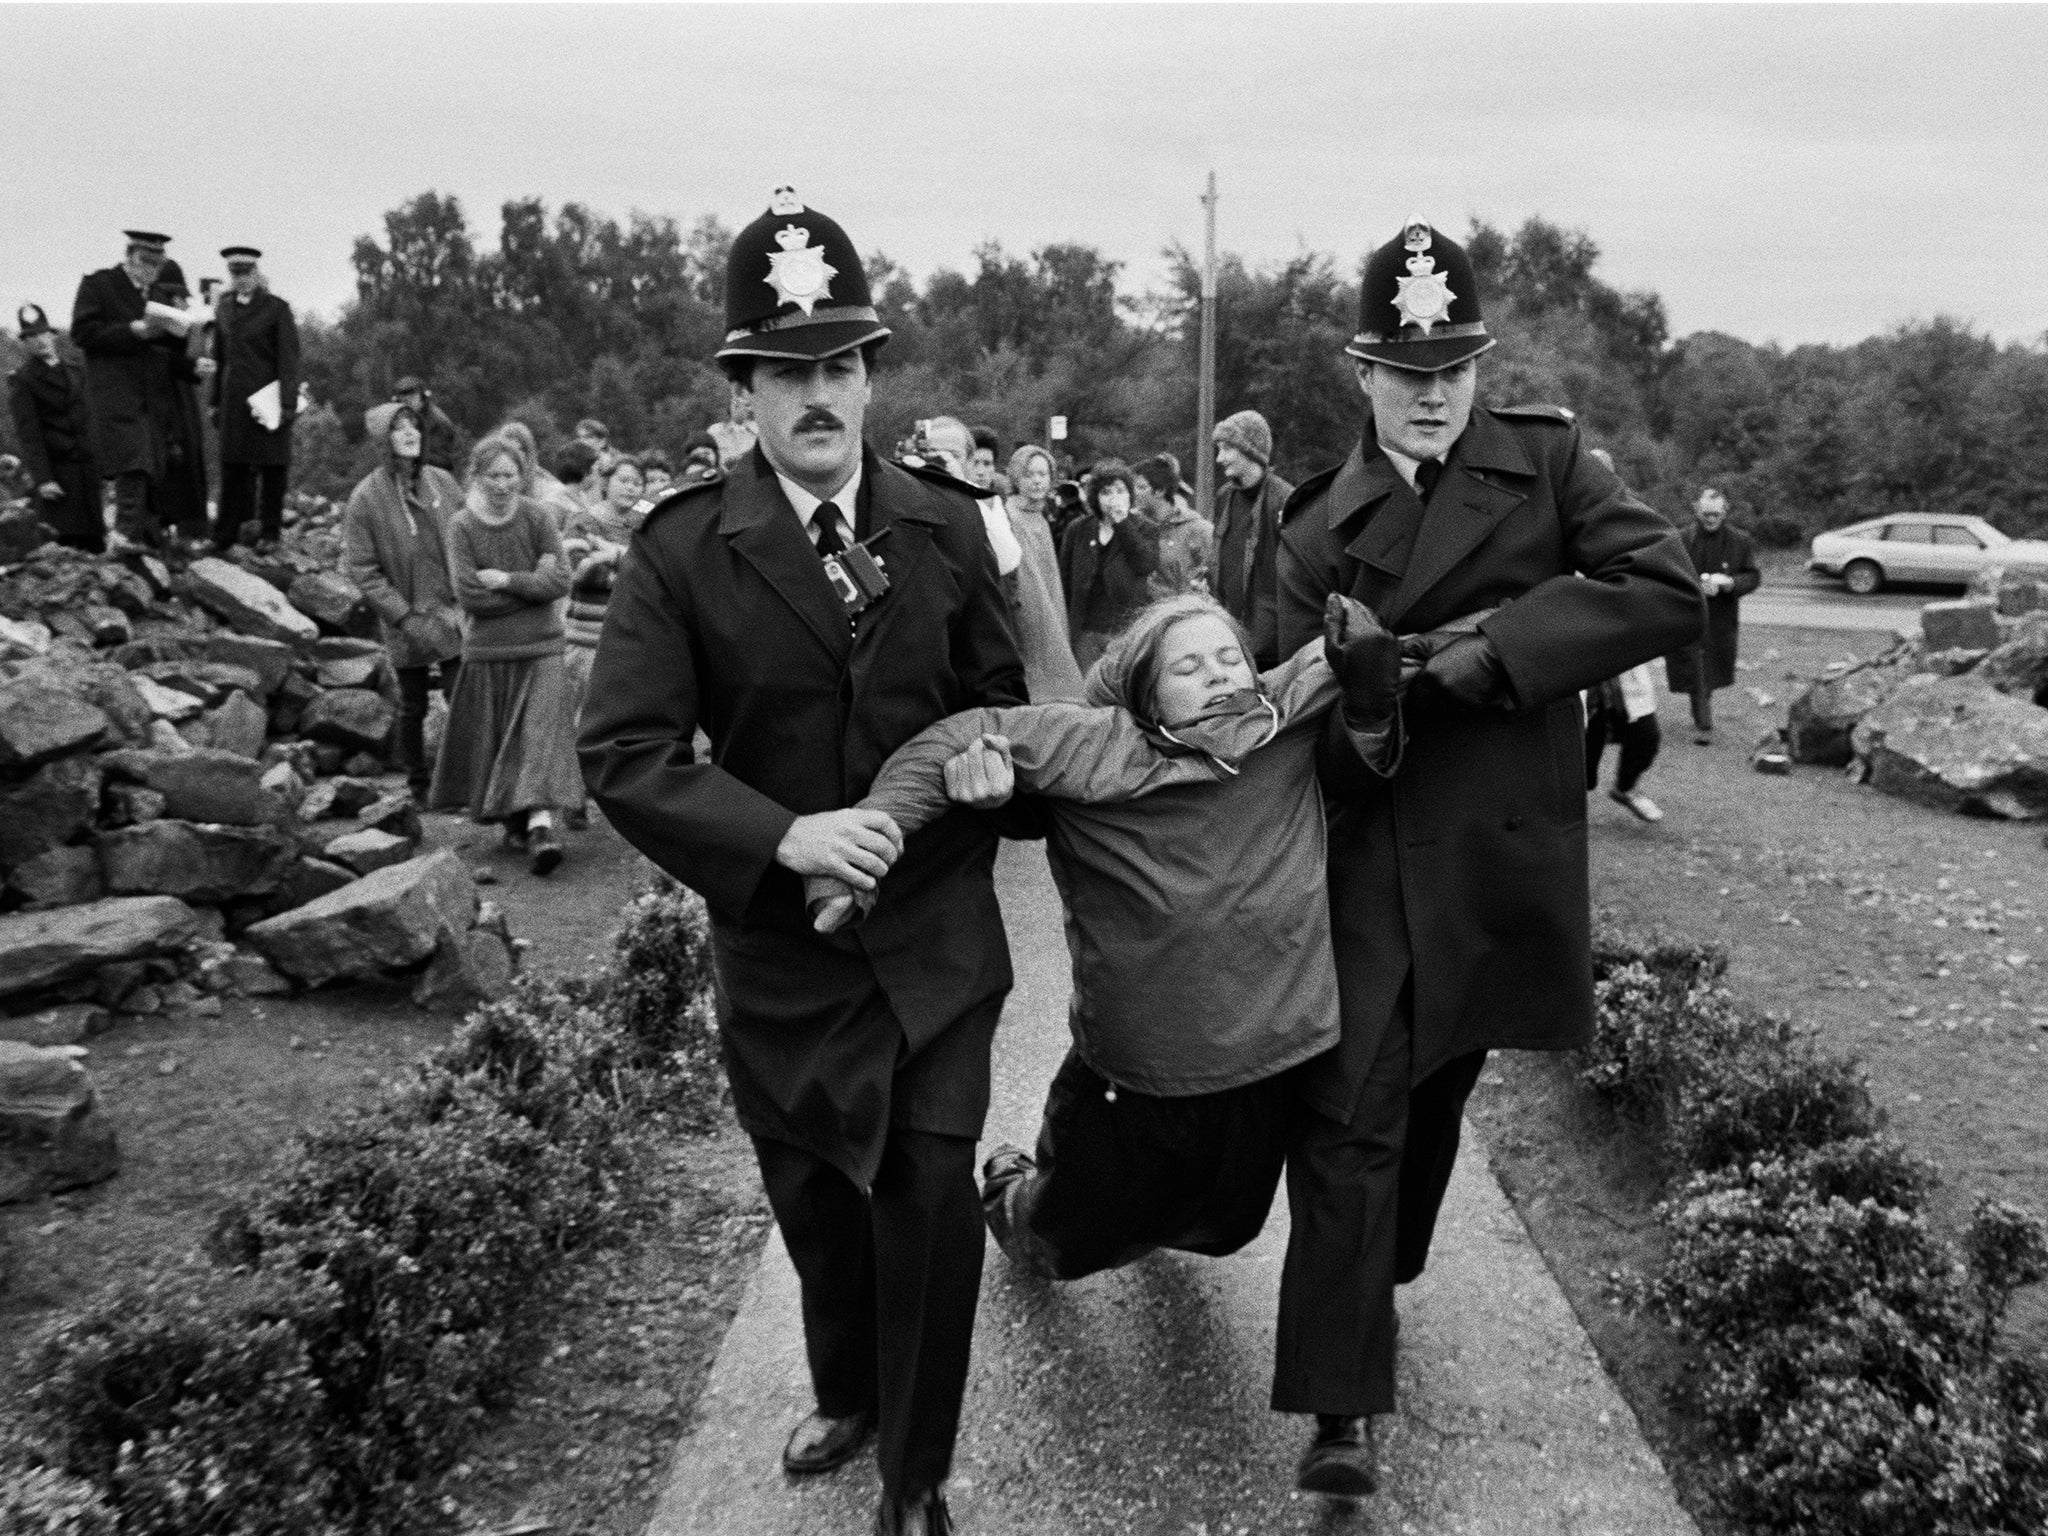 Rebecca Johnson being arrested at Greenham common